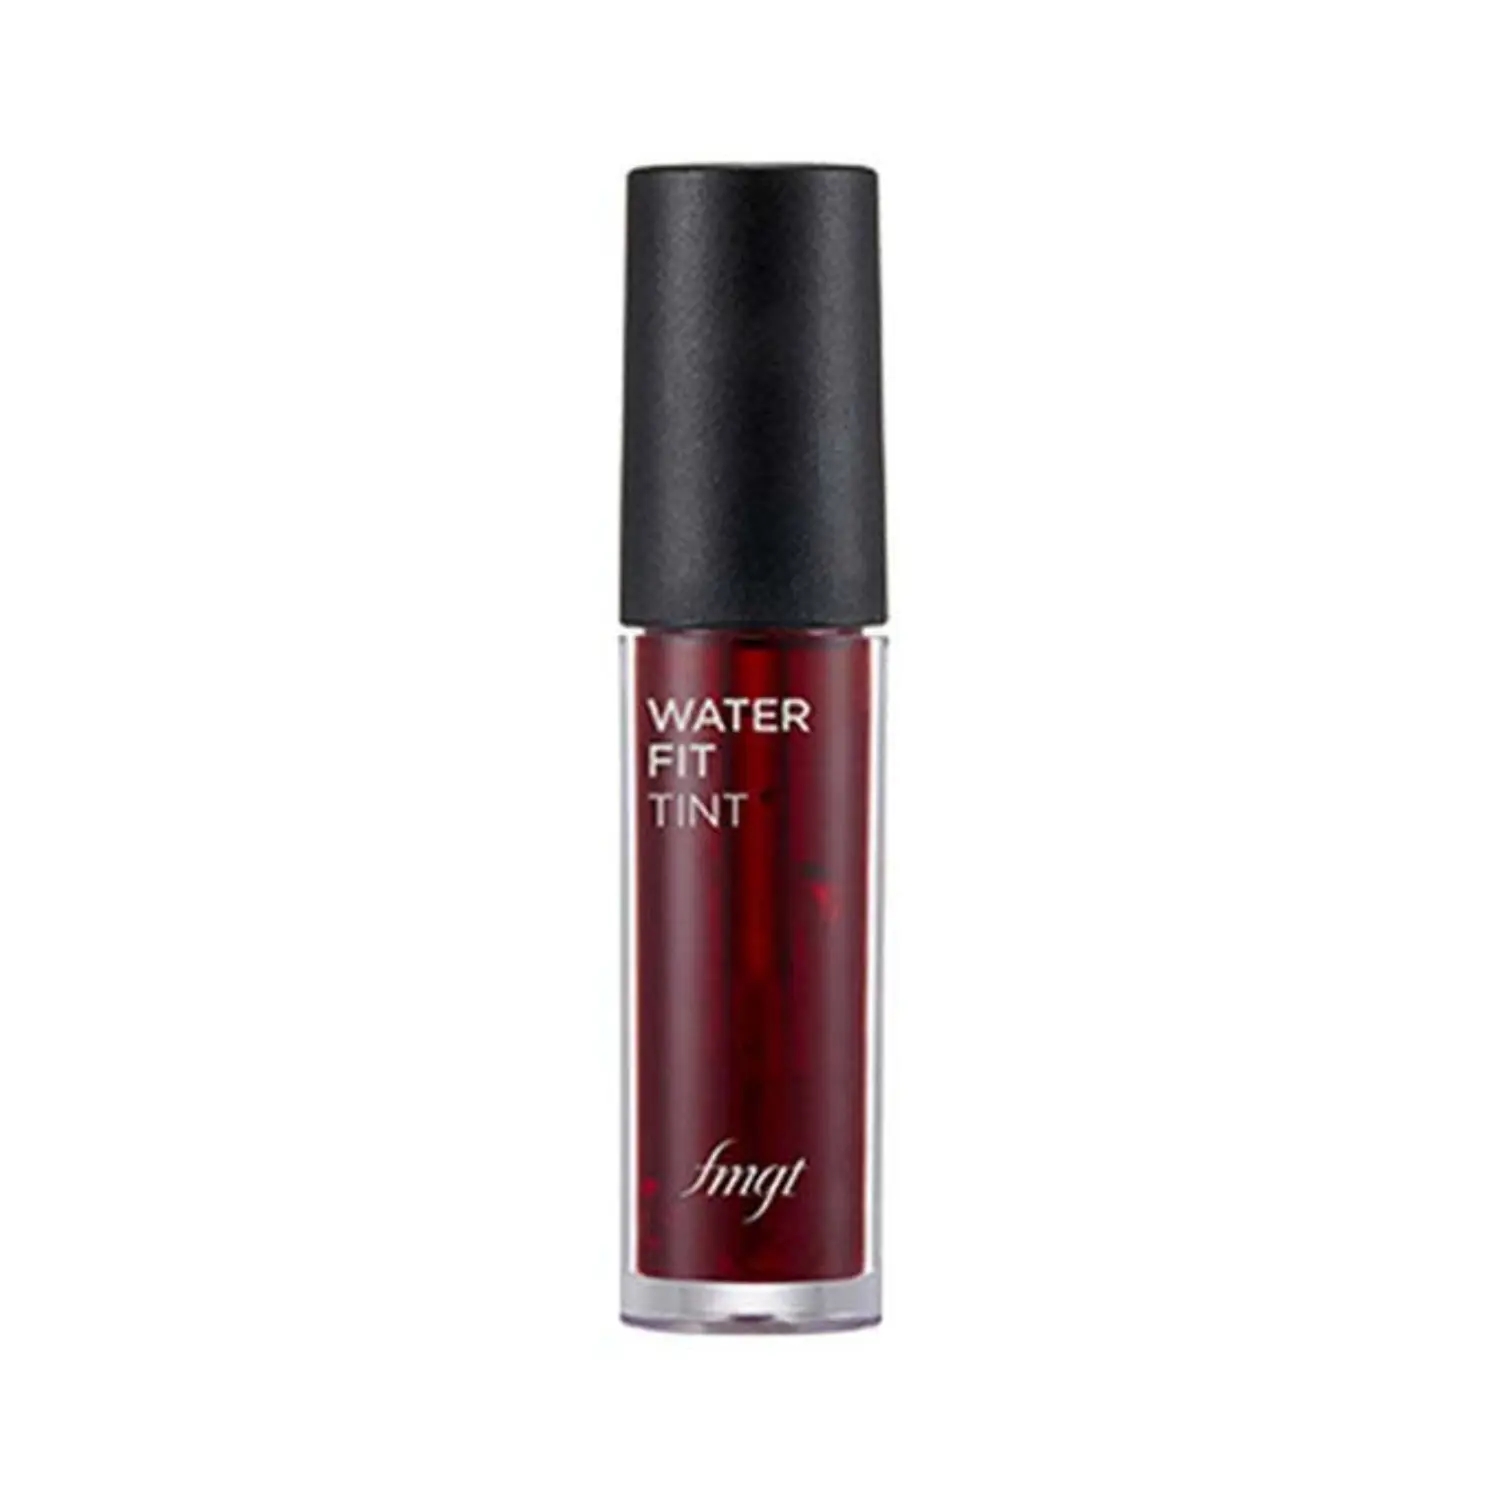 The Face Shop | The Face Shop Water Fit Lip Tint - Cherry Kiss (5g)